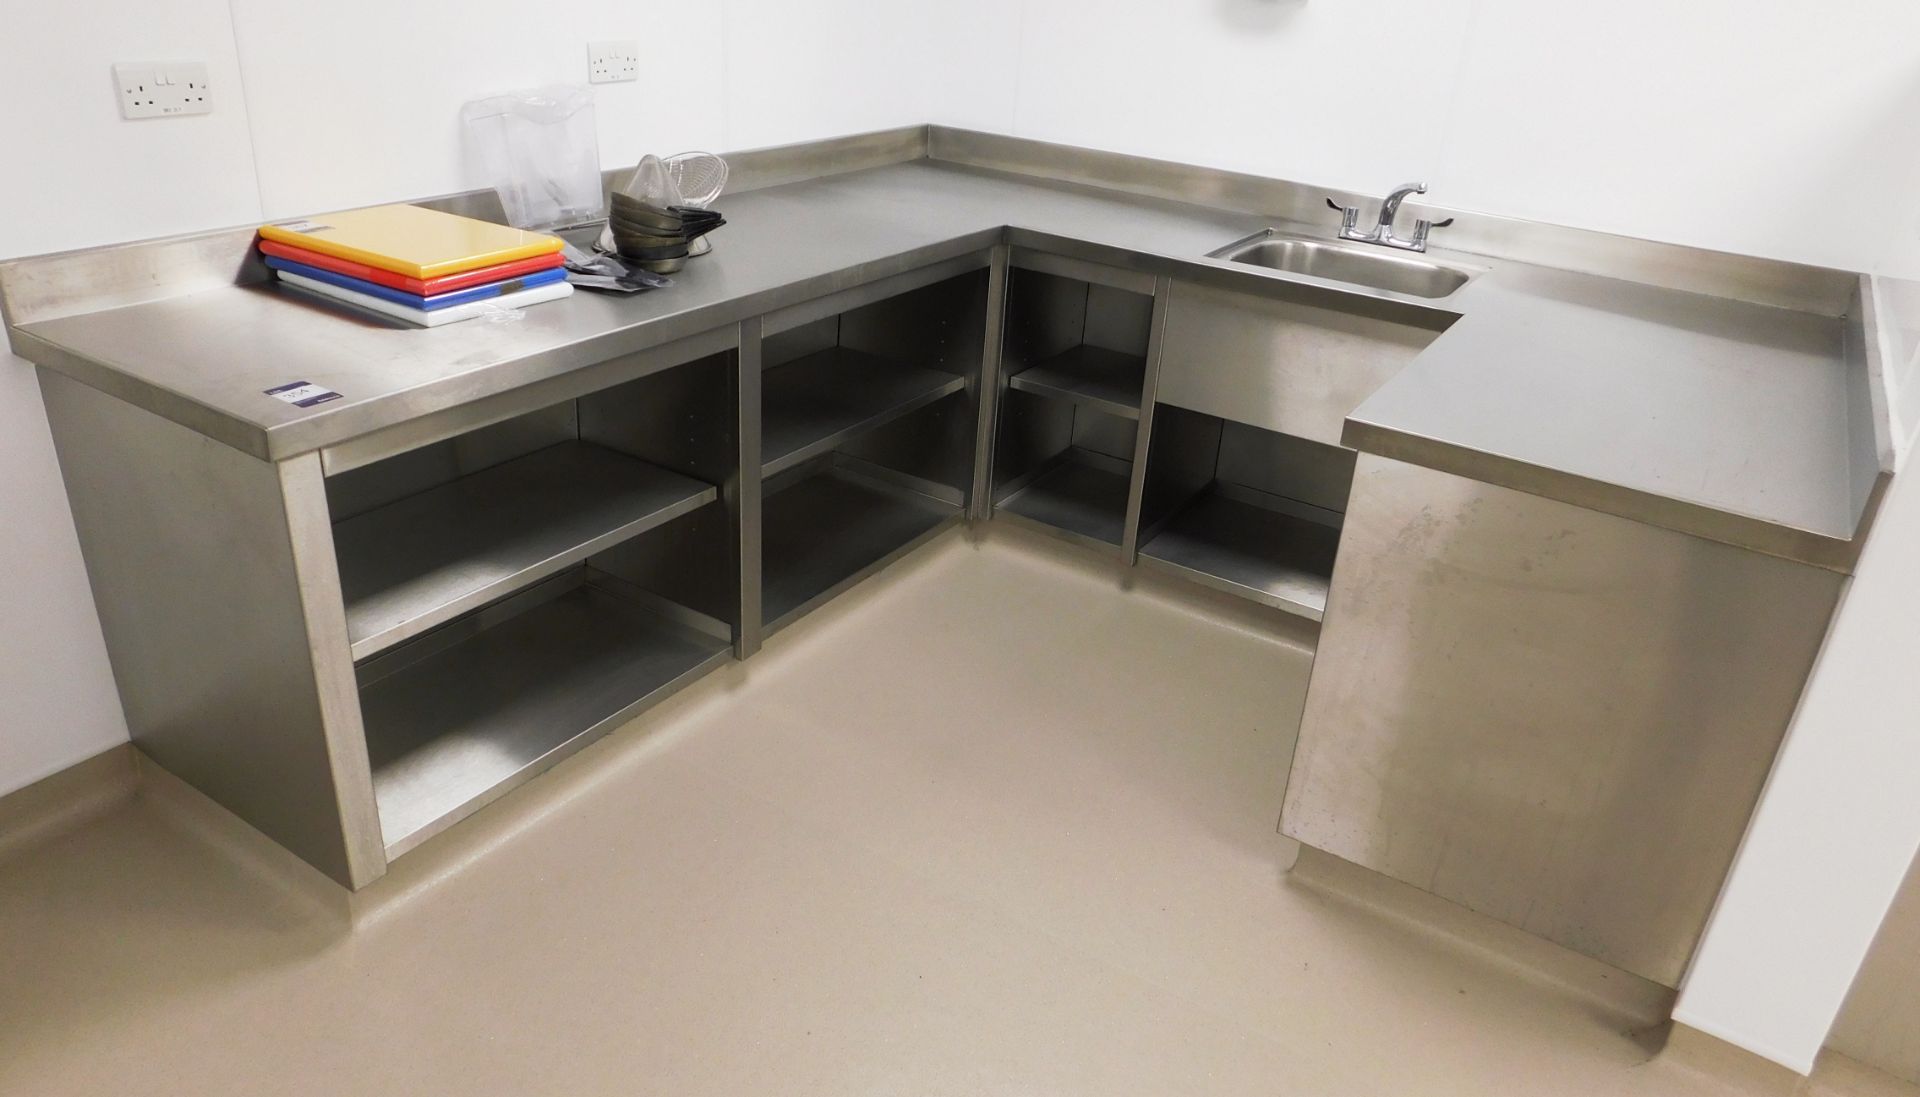 Fitted U Shape Bench Unit Stainless Steel with Deep Well Sink (requires disconnection)